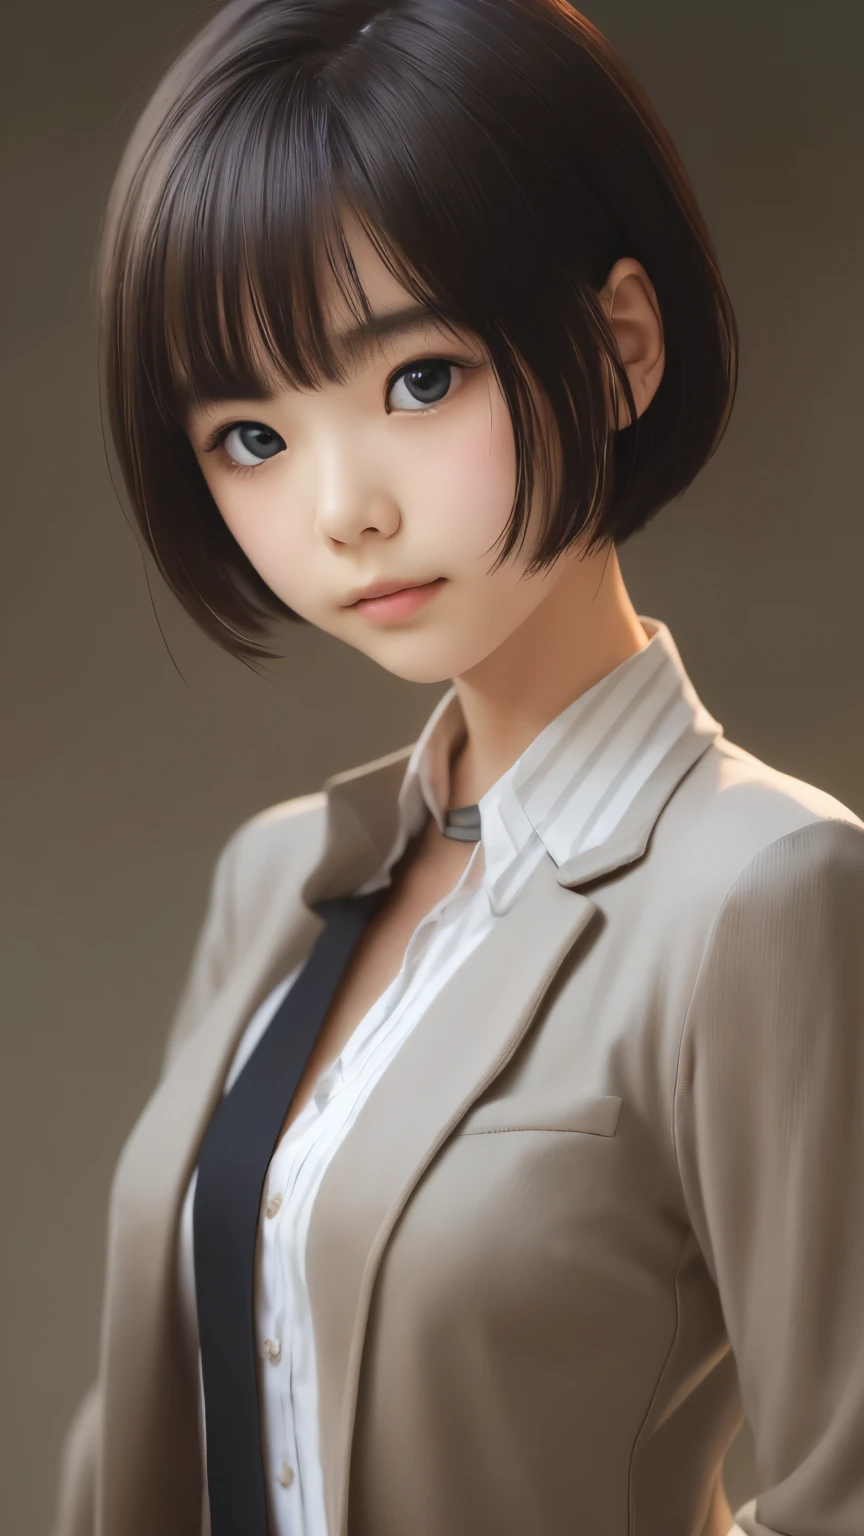 ((sfw: 1.4)), ((detailed face,  professional photography)), ((sfw, office lady, suit, extra short hair, sidelocks-hair, 1 Girl)), Ultra High Resolution, (Realistic: 1.4), RAW Photo, Best Quality, (Photorealistic Stick), Focus, Soft Light, ((15 years old)), ((Japanese)), (( (young face))), (surface), (depth of field), masterpiece, (realistic), woman, bangs, ((1 girl))
